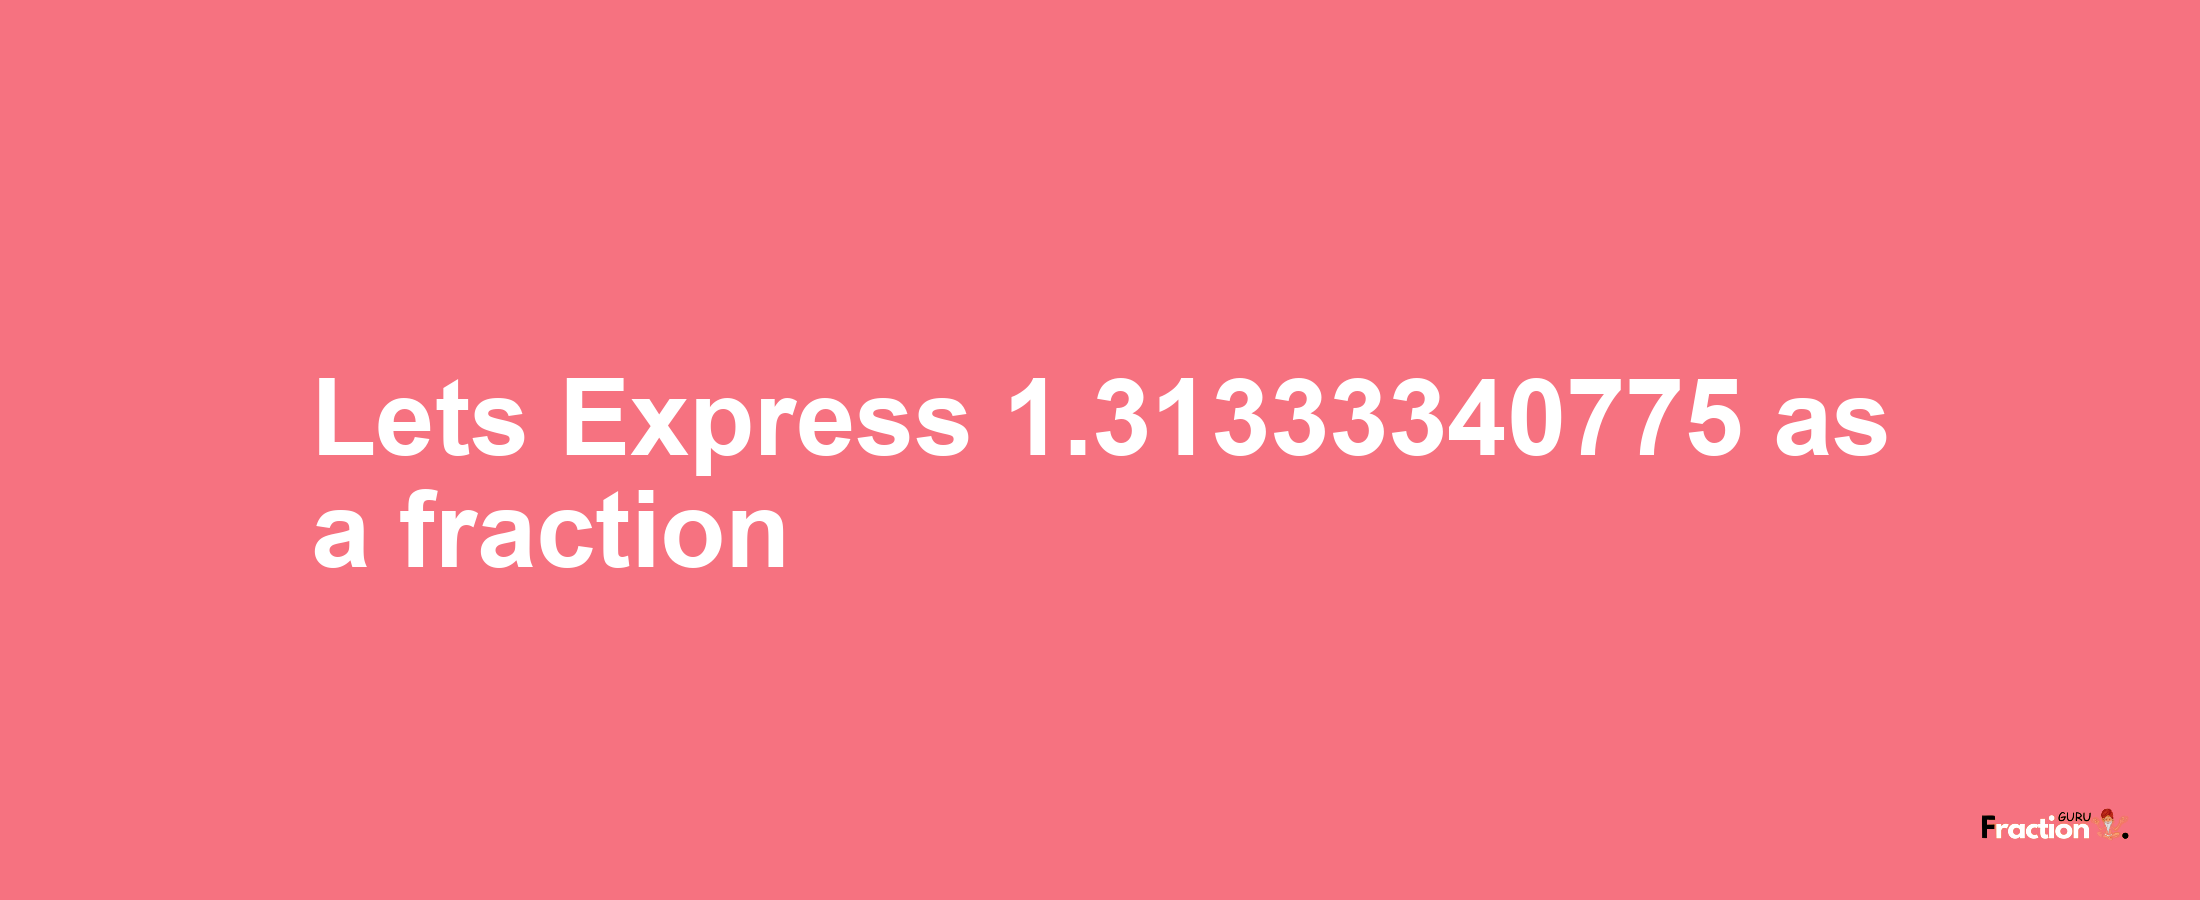 Lets Express 1.31333340775 as afraction